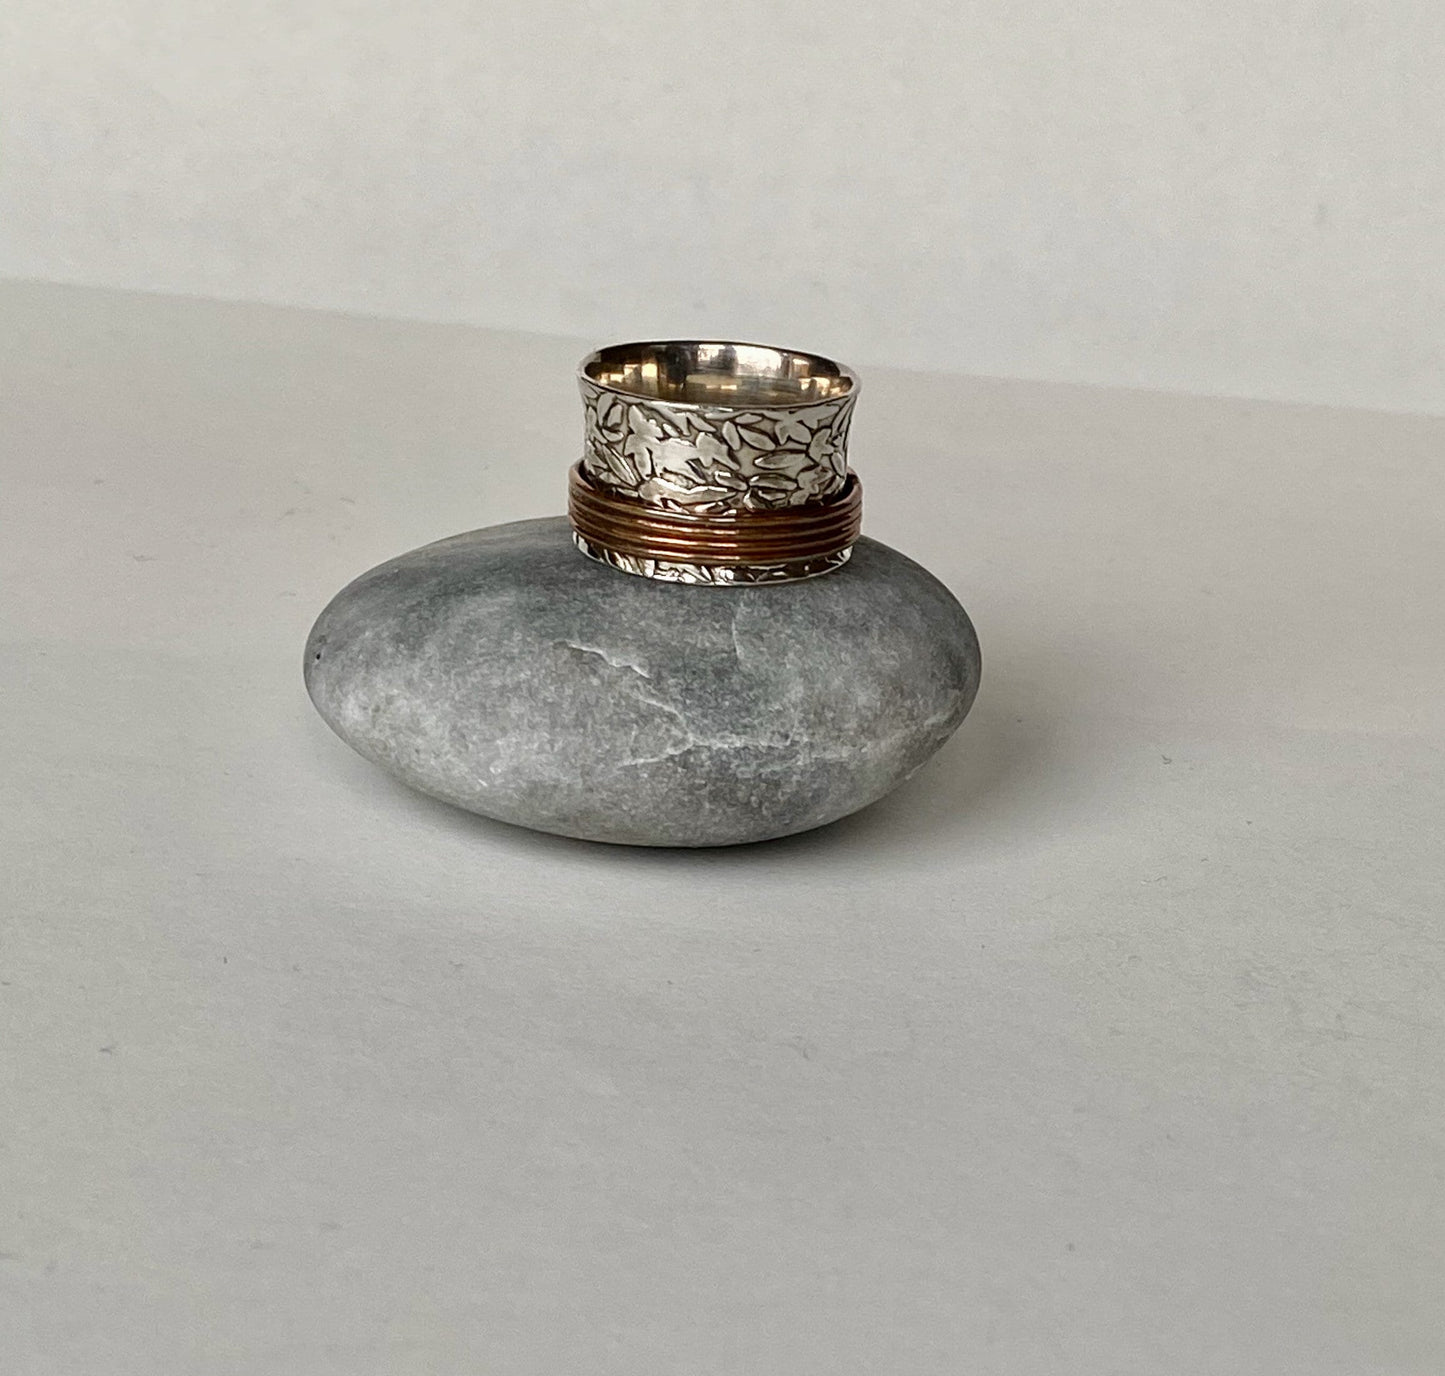 Handmade size 6 sterling silver and copper spinning ring.